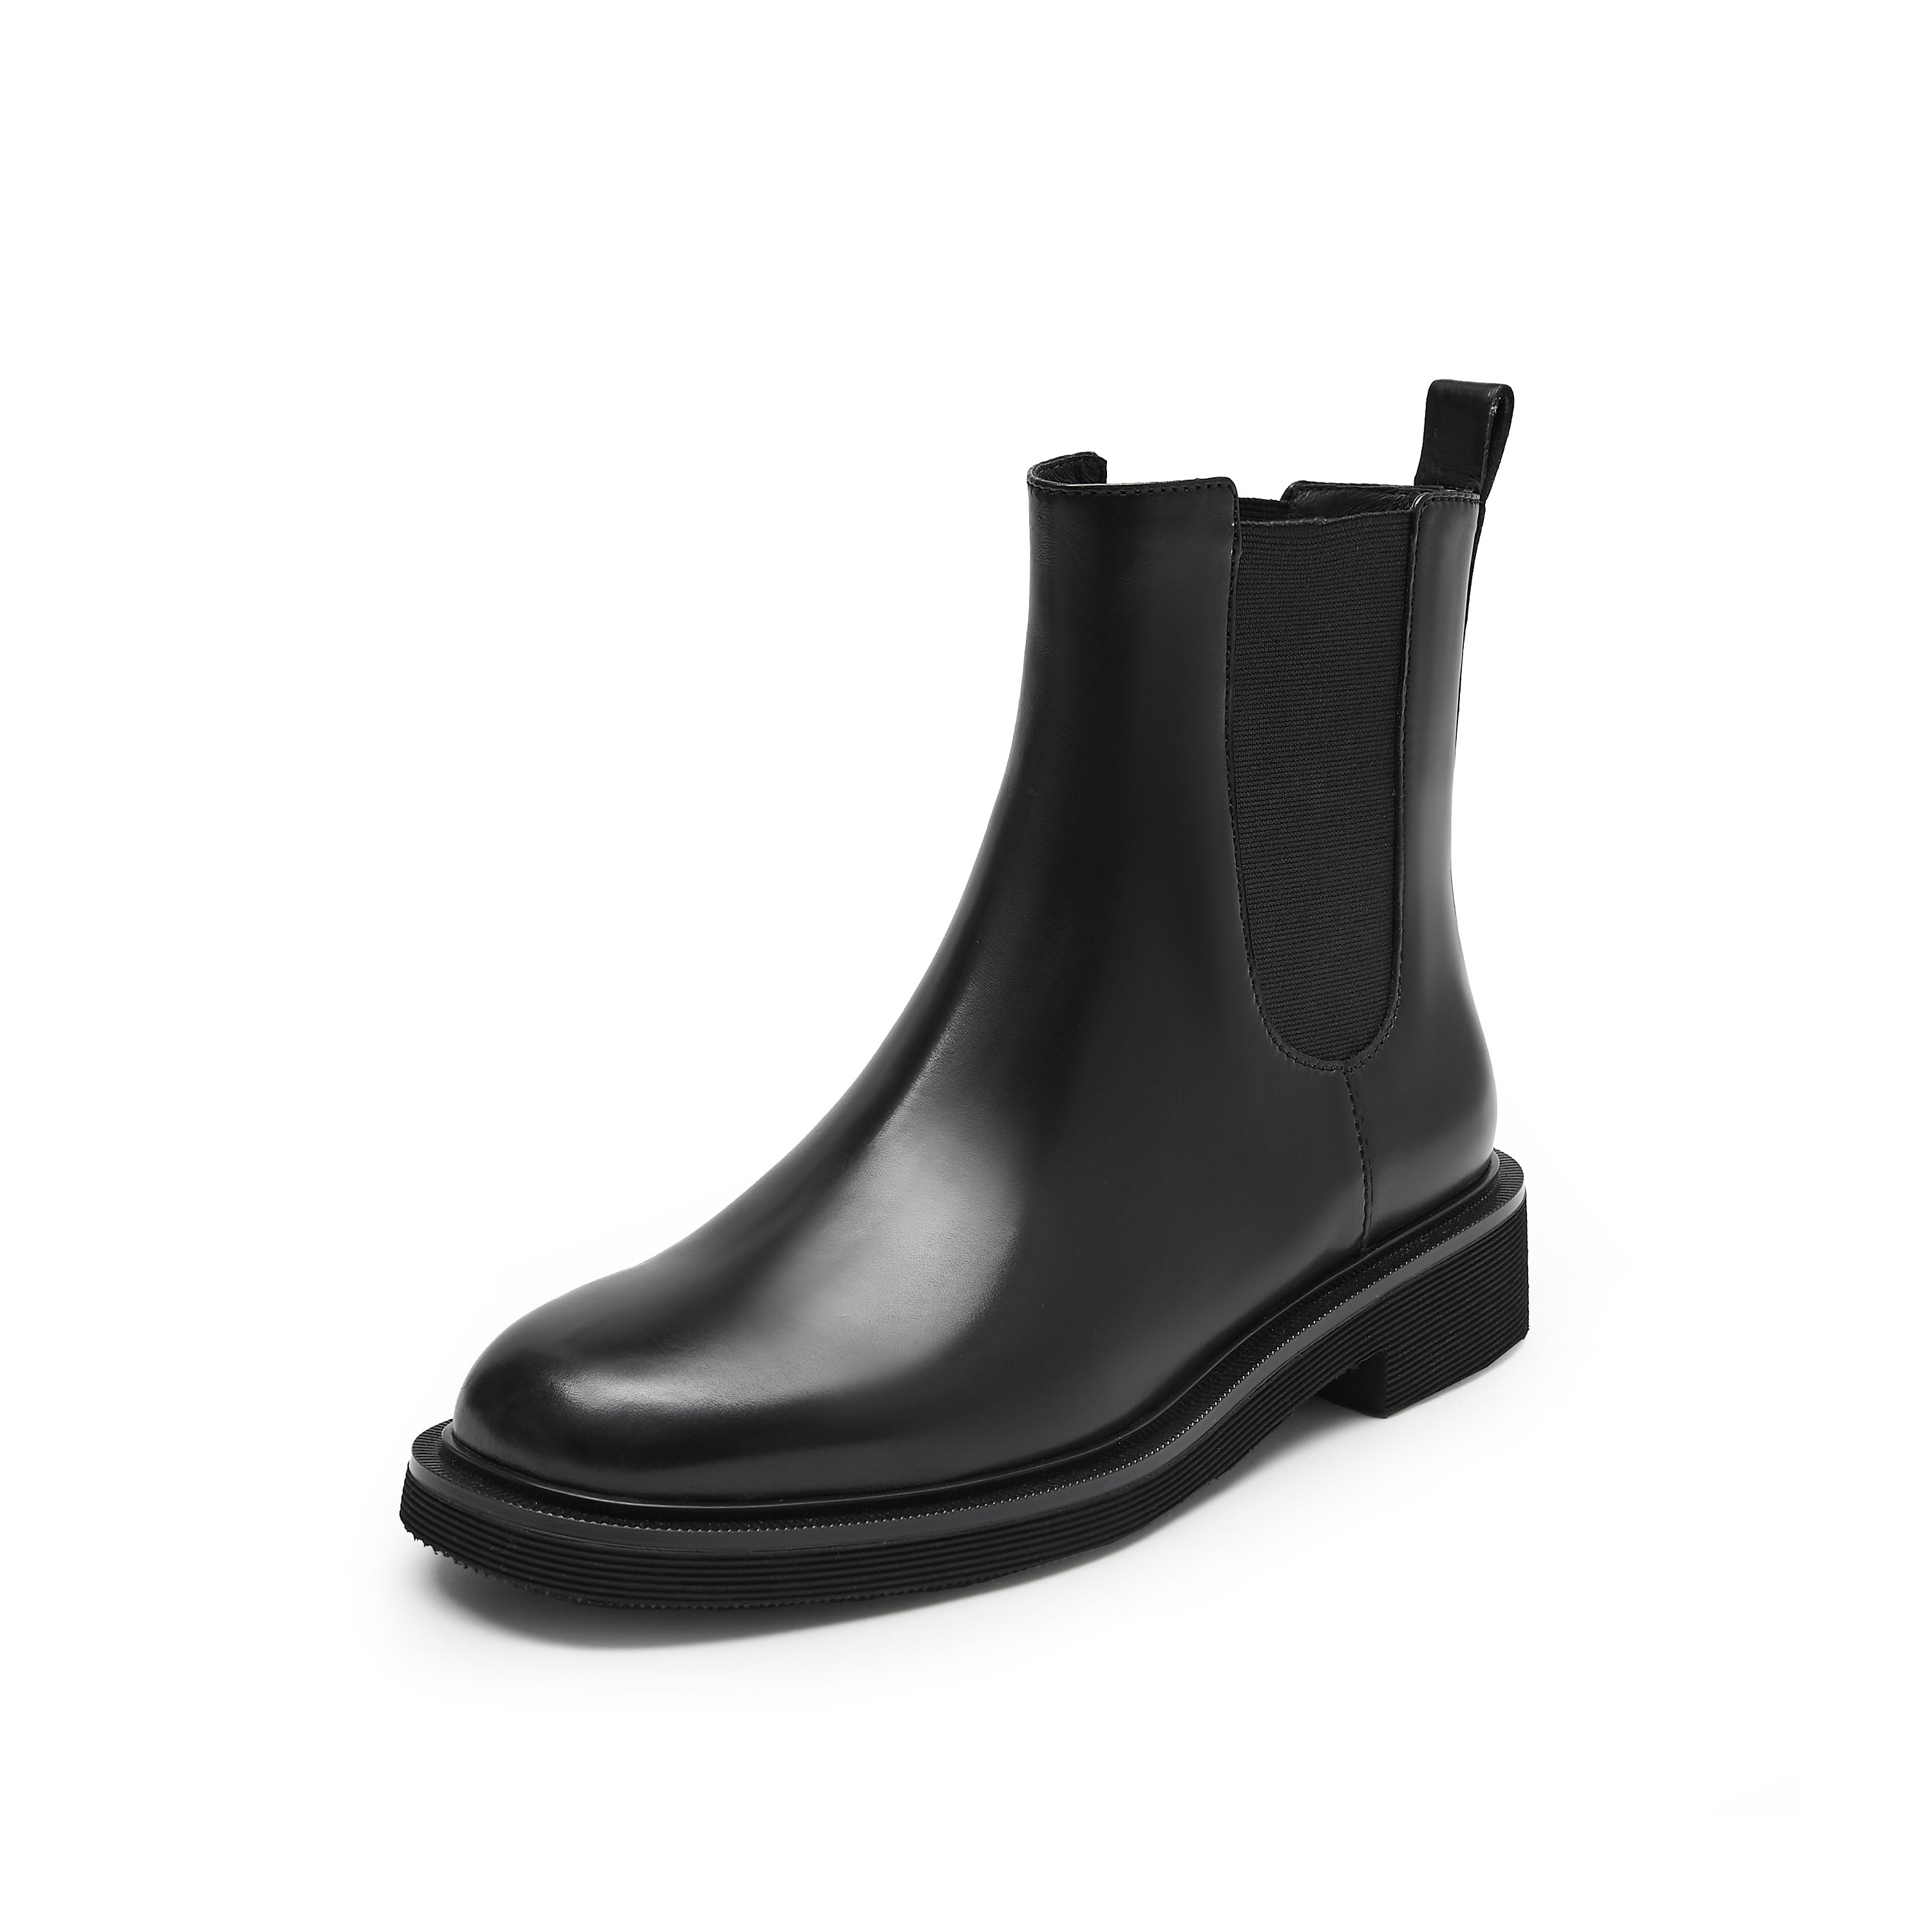 [STACCATO - Official Site] Black Leather Calf Charles Boots